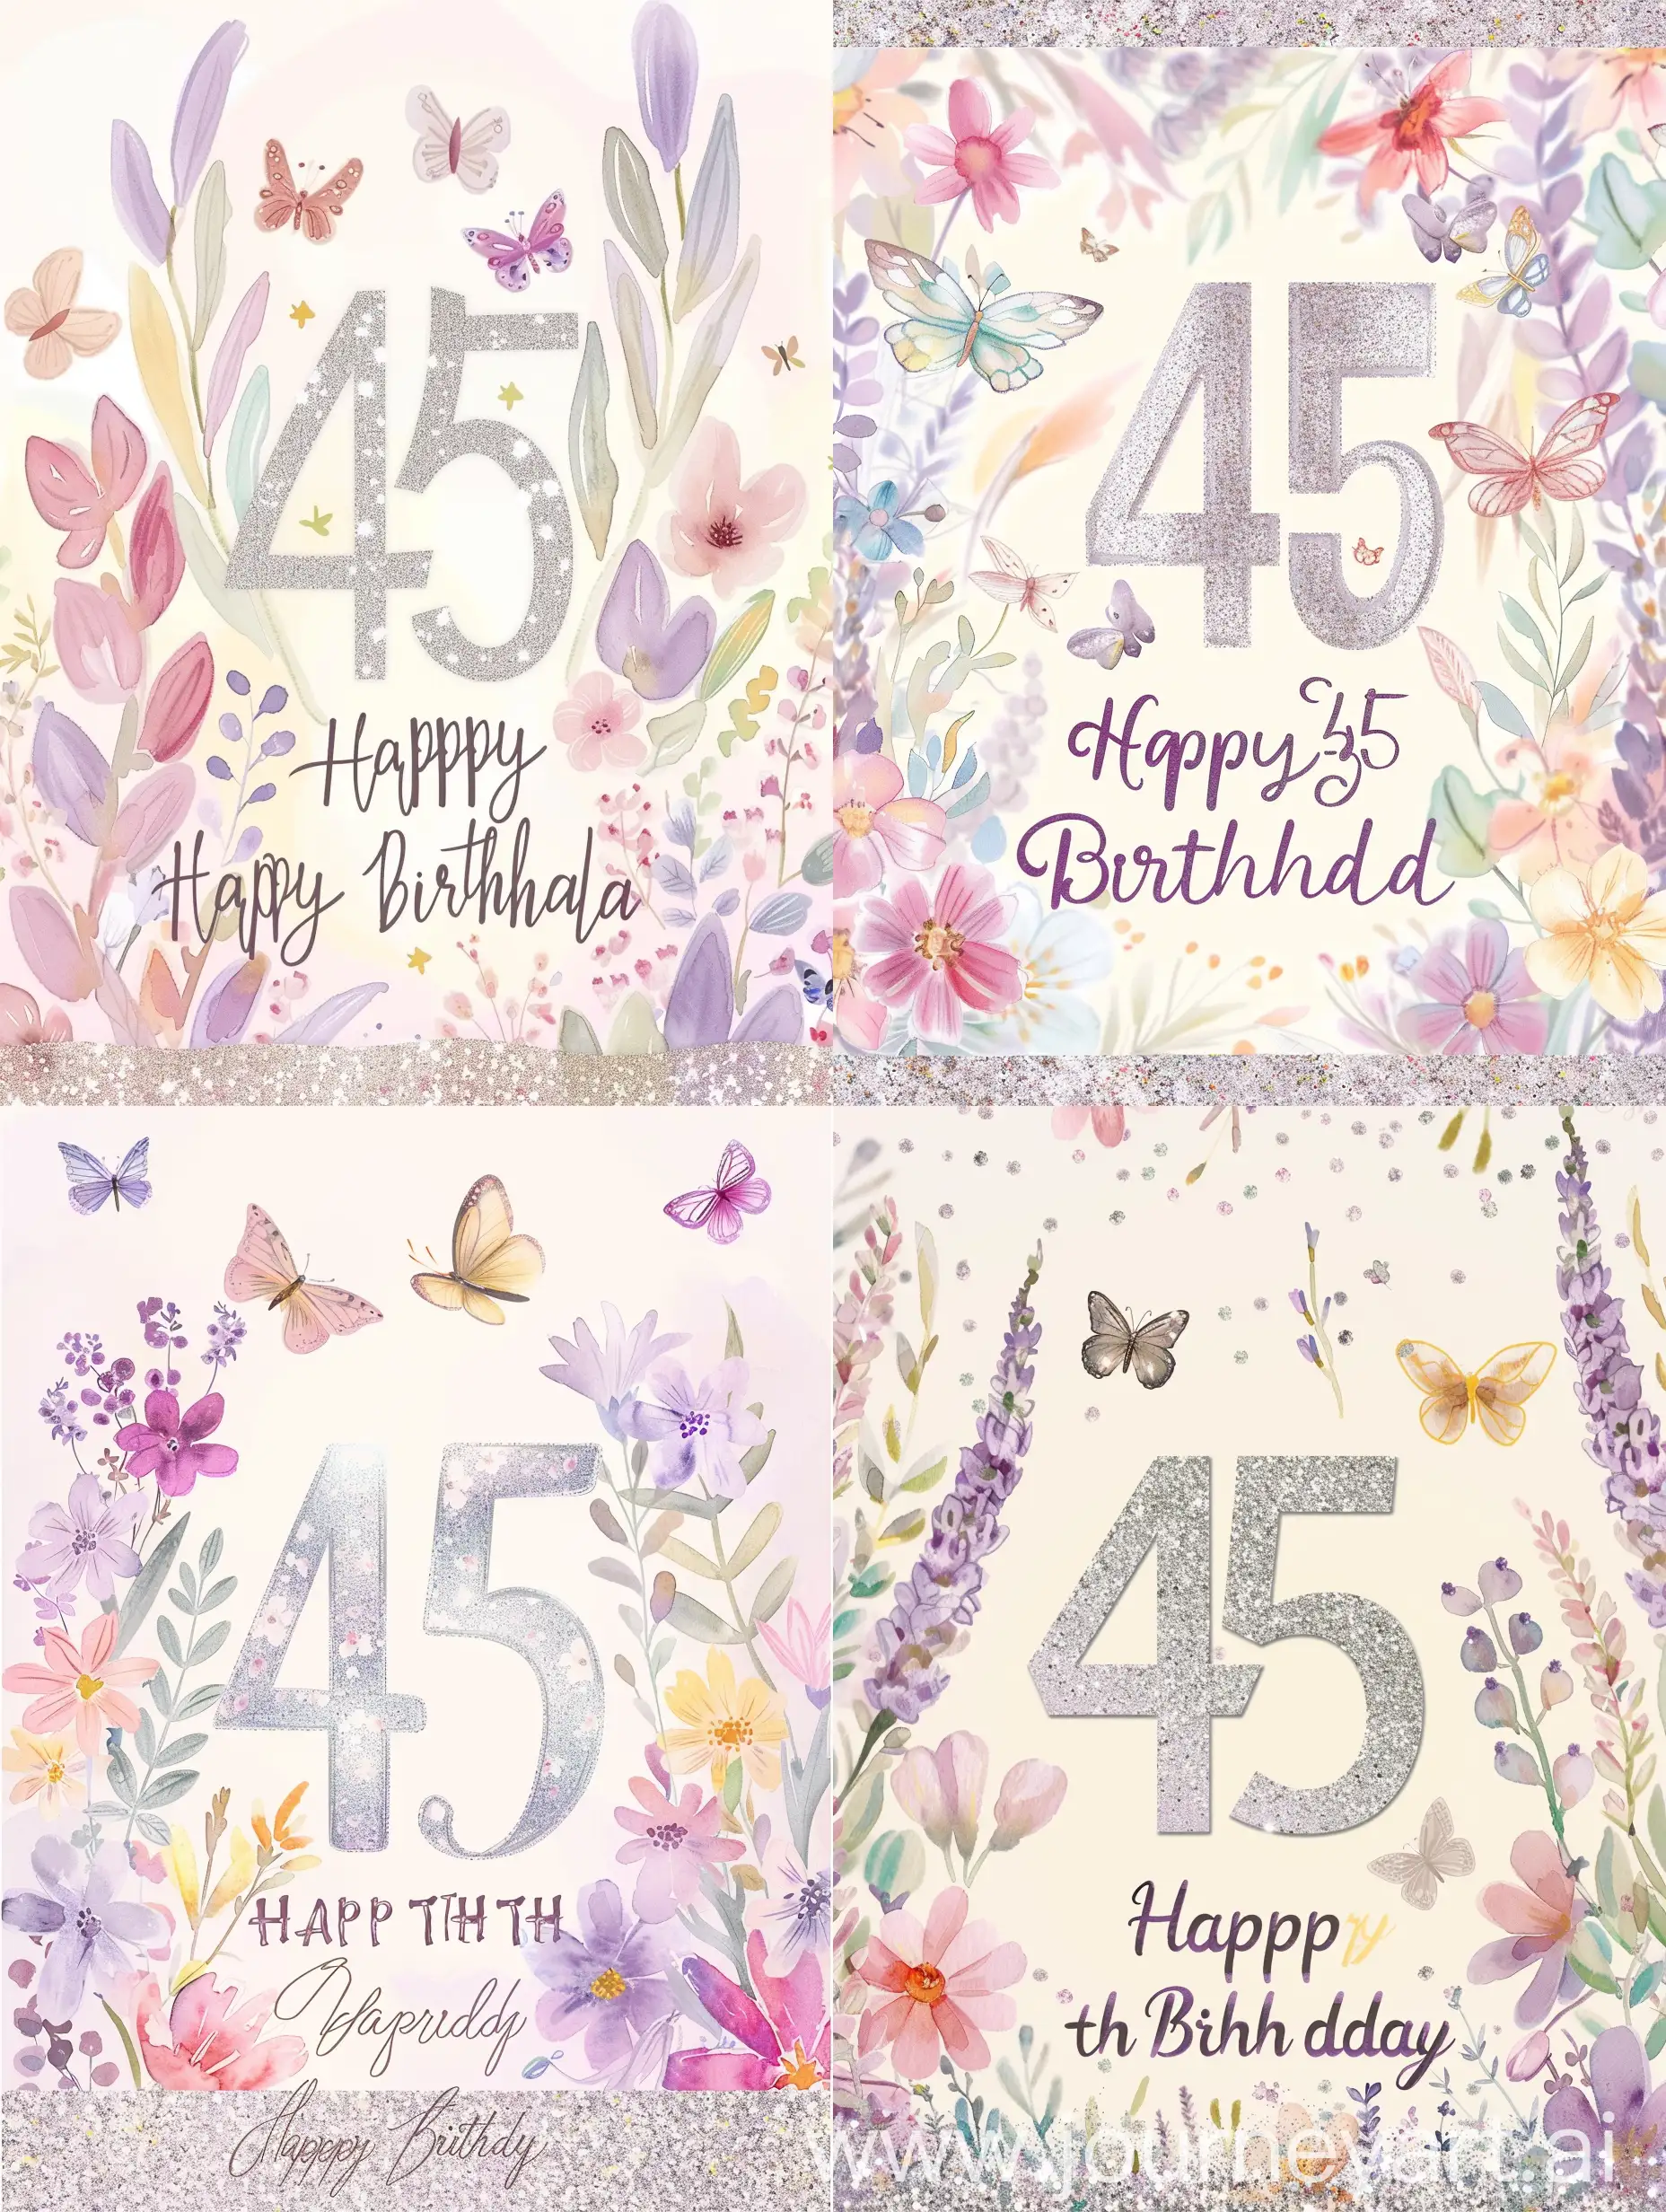 Elegant-45th-Birthday-Greeting-Card-with-Watercolor-Florals-and-Butterflies